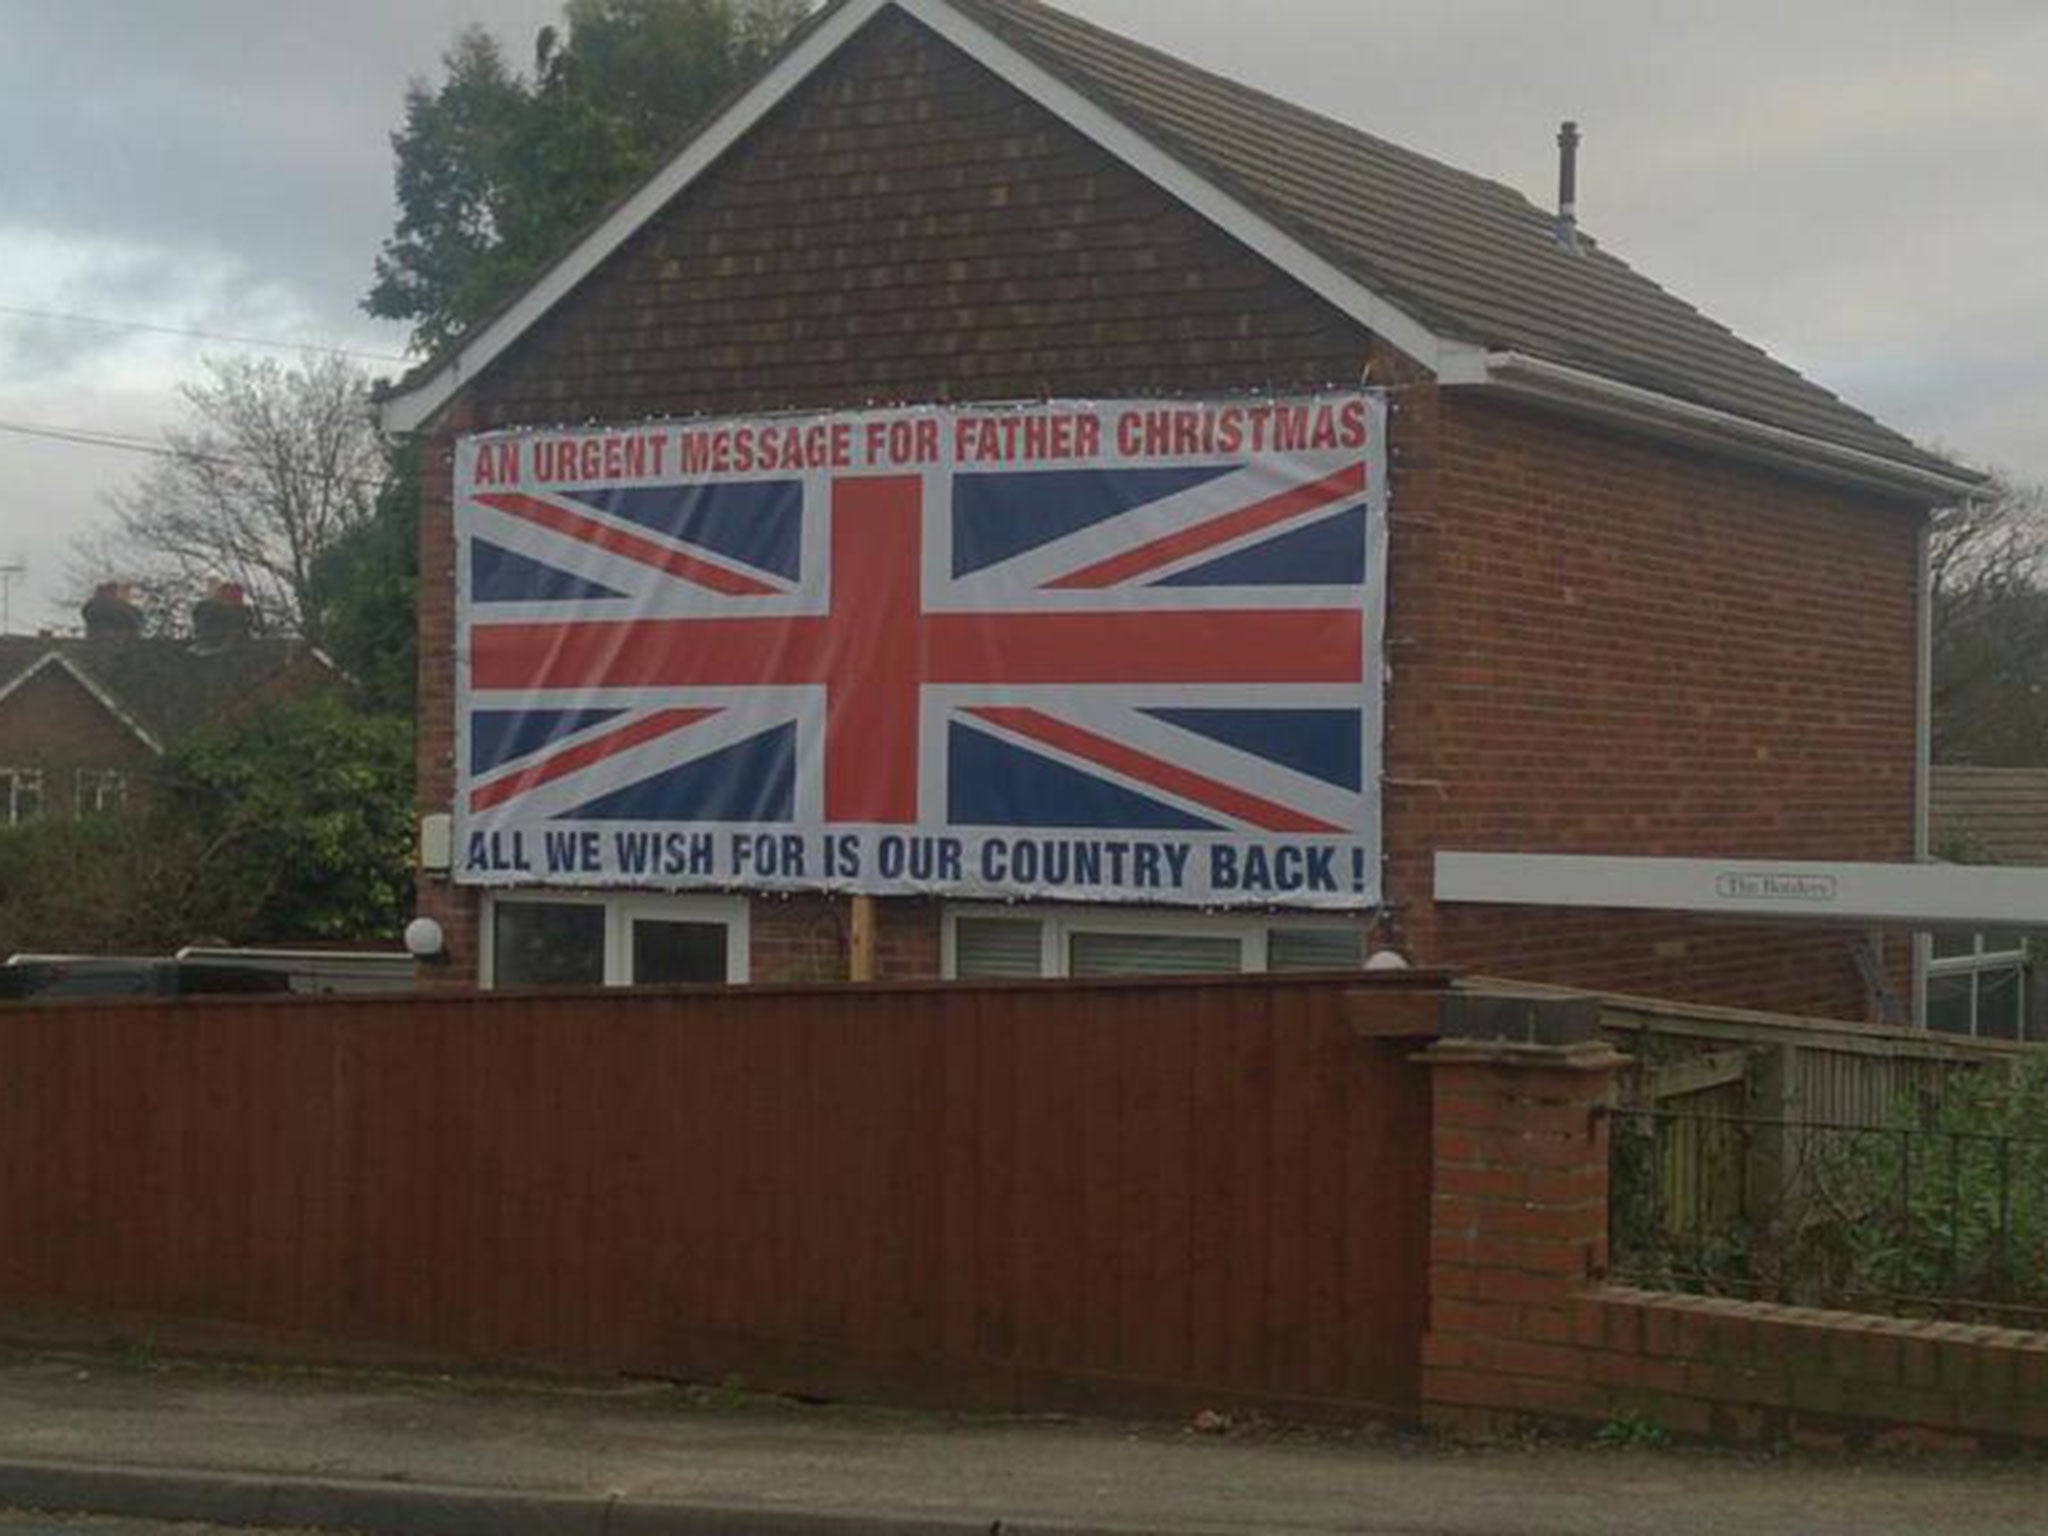 One Ukip supporter got into the festive spirit this year by erecting a huge flag emblazoned with an “urgent” plea for Santa to “give the UK its country back”.